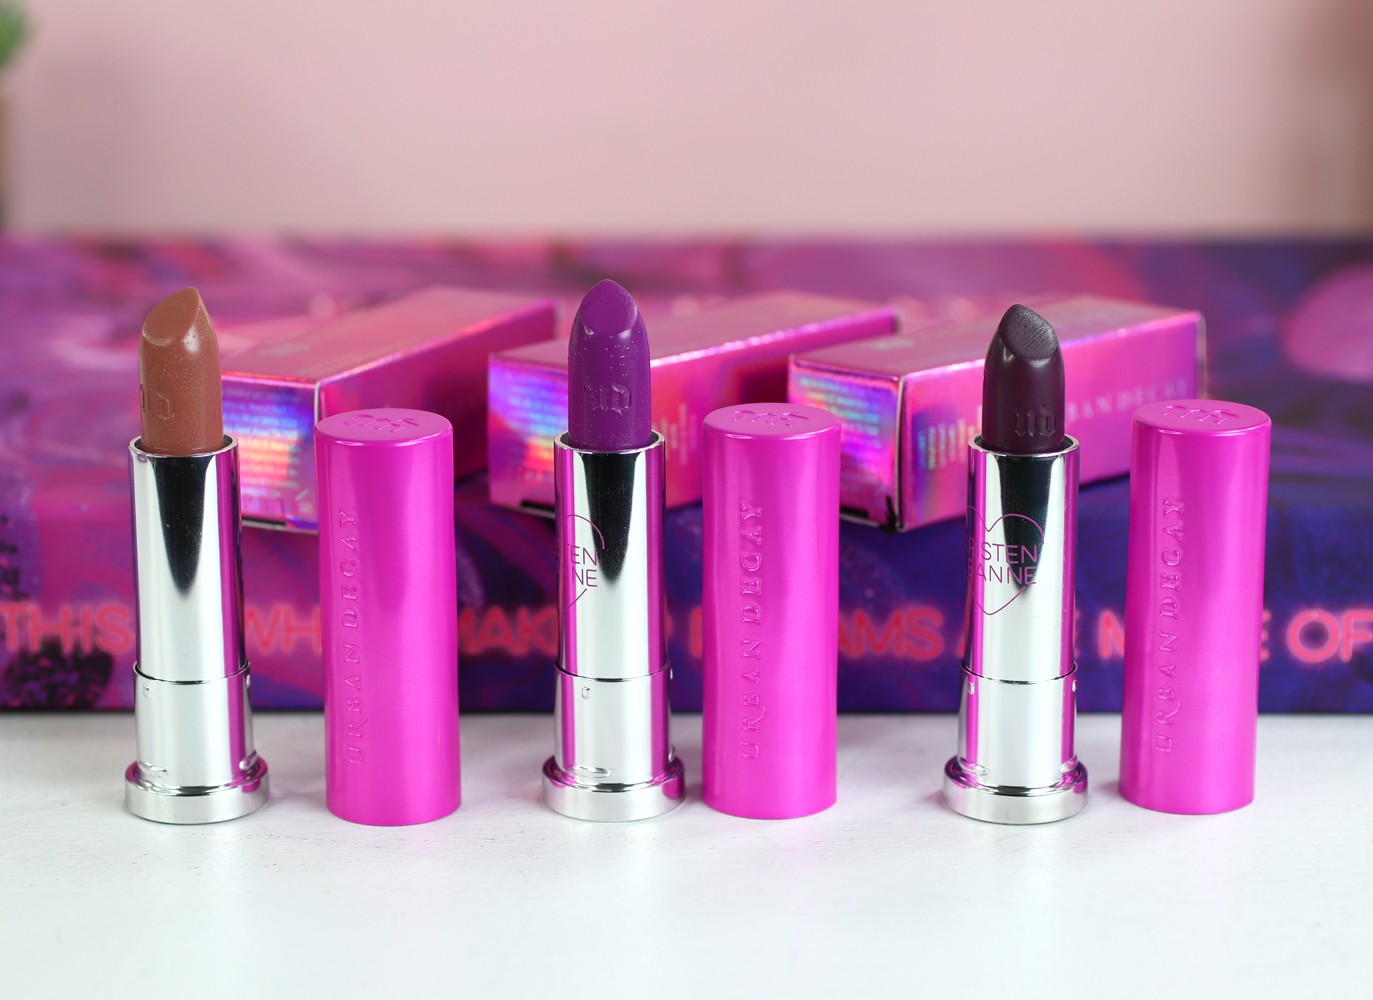 Urban Decay x Kristen Leanne Vice Lipstick Swatches and Review by popular Los Angeles beauty blogger My Beauty Bunny